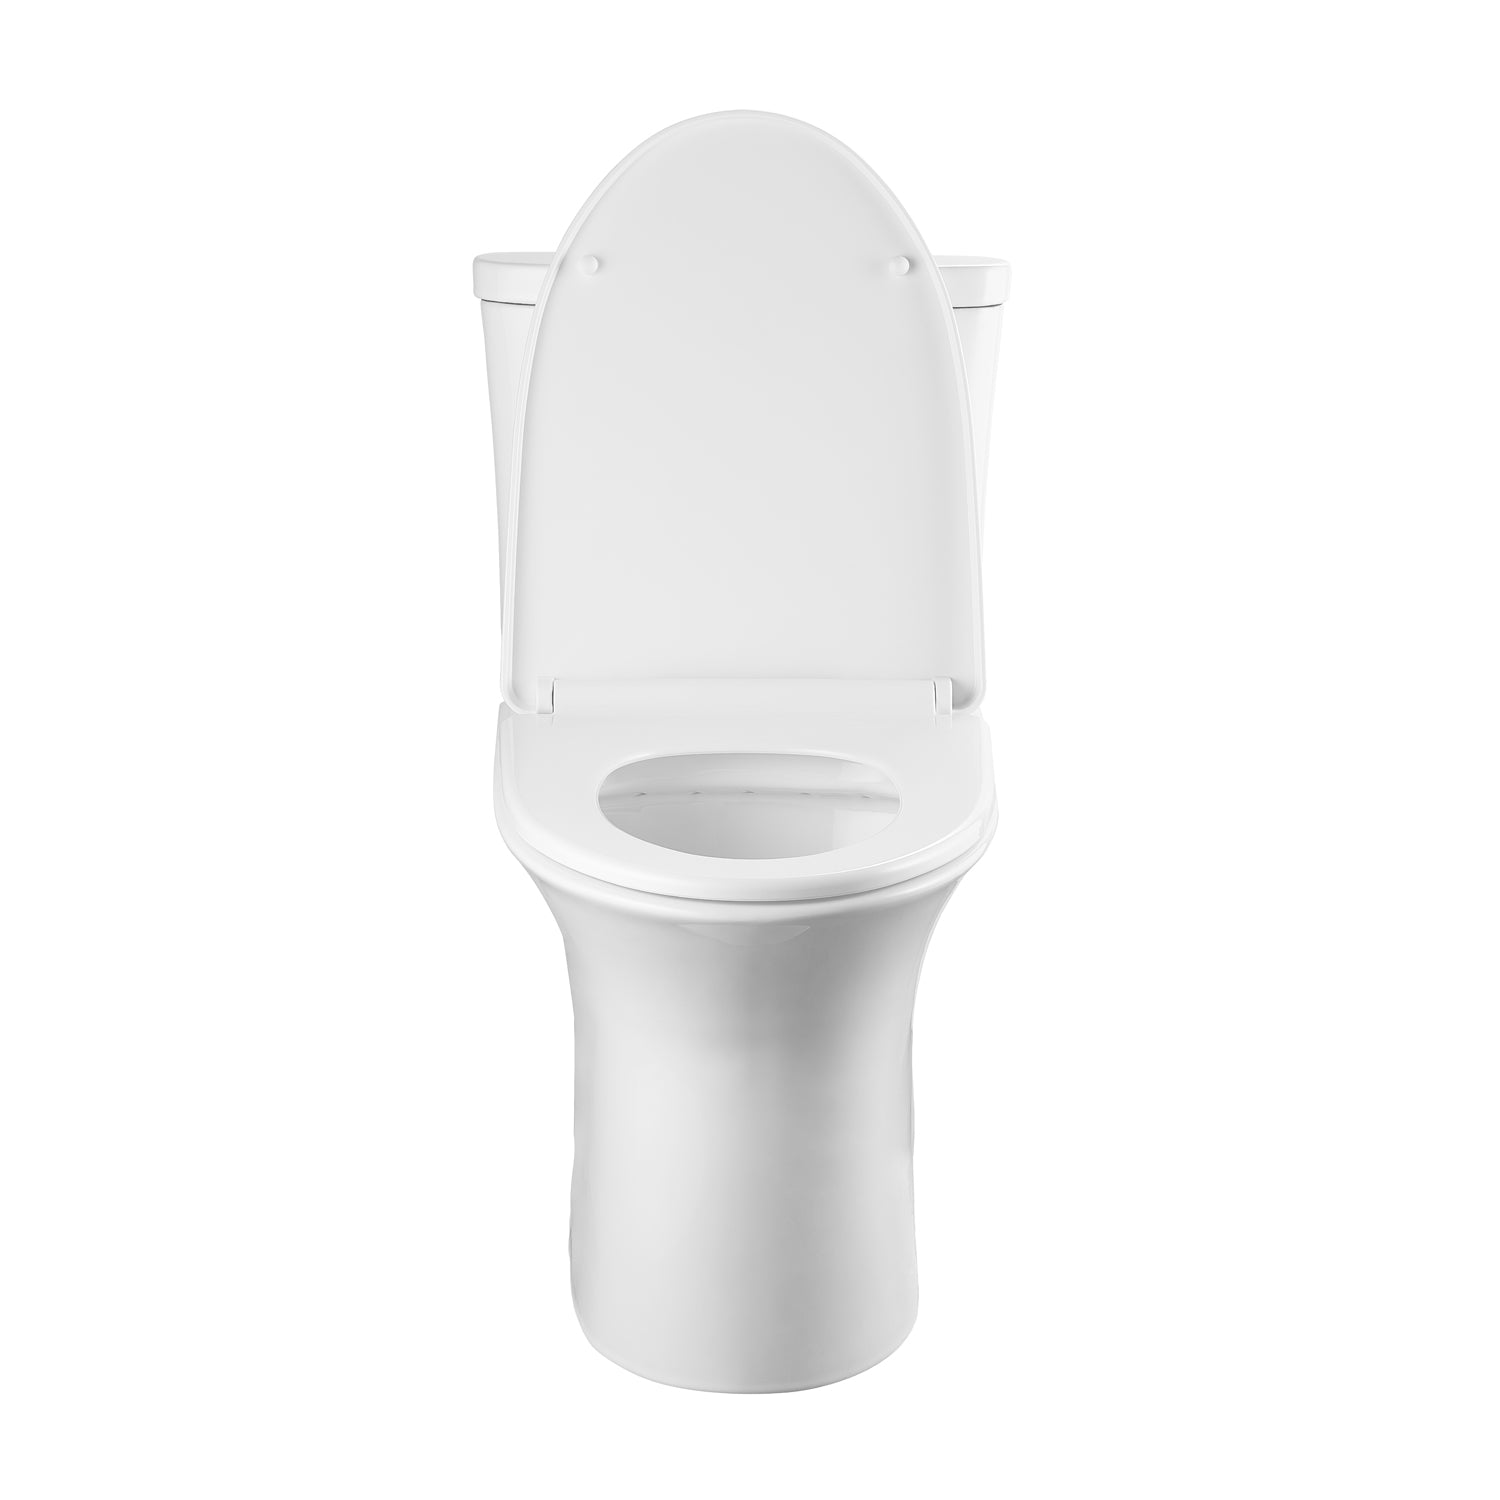 Dual-Flush Elongated One-Piece Black Toilet (Seat Included)